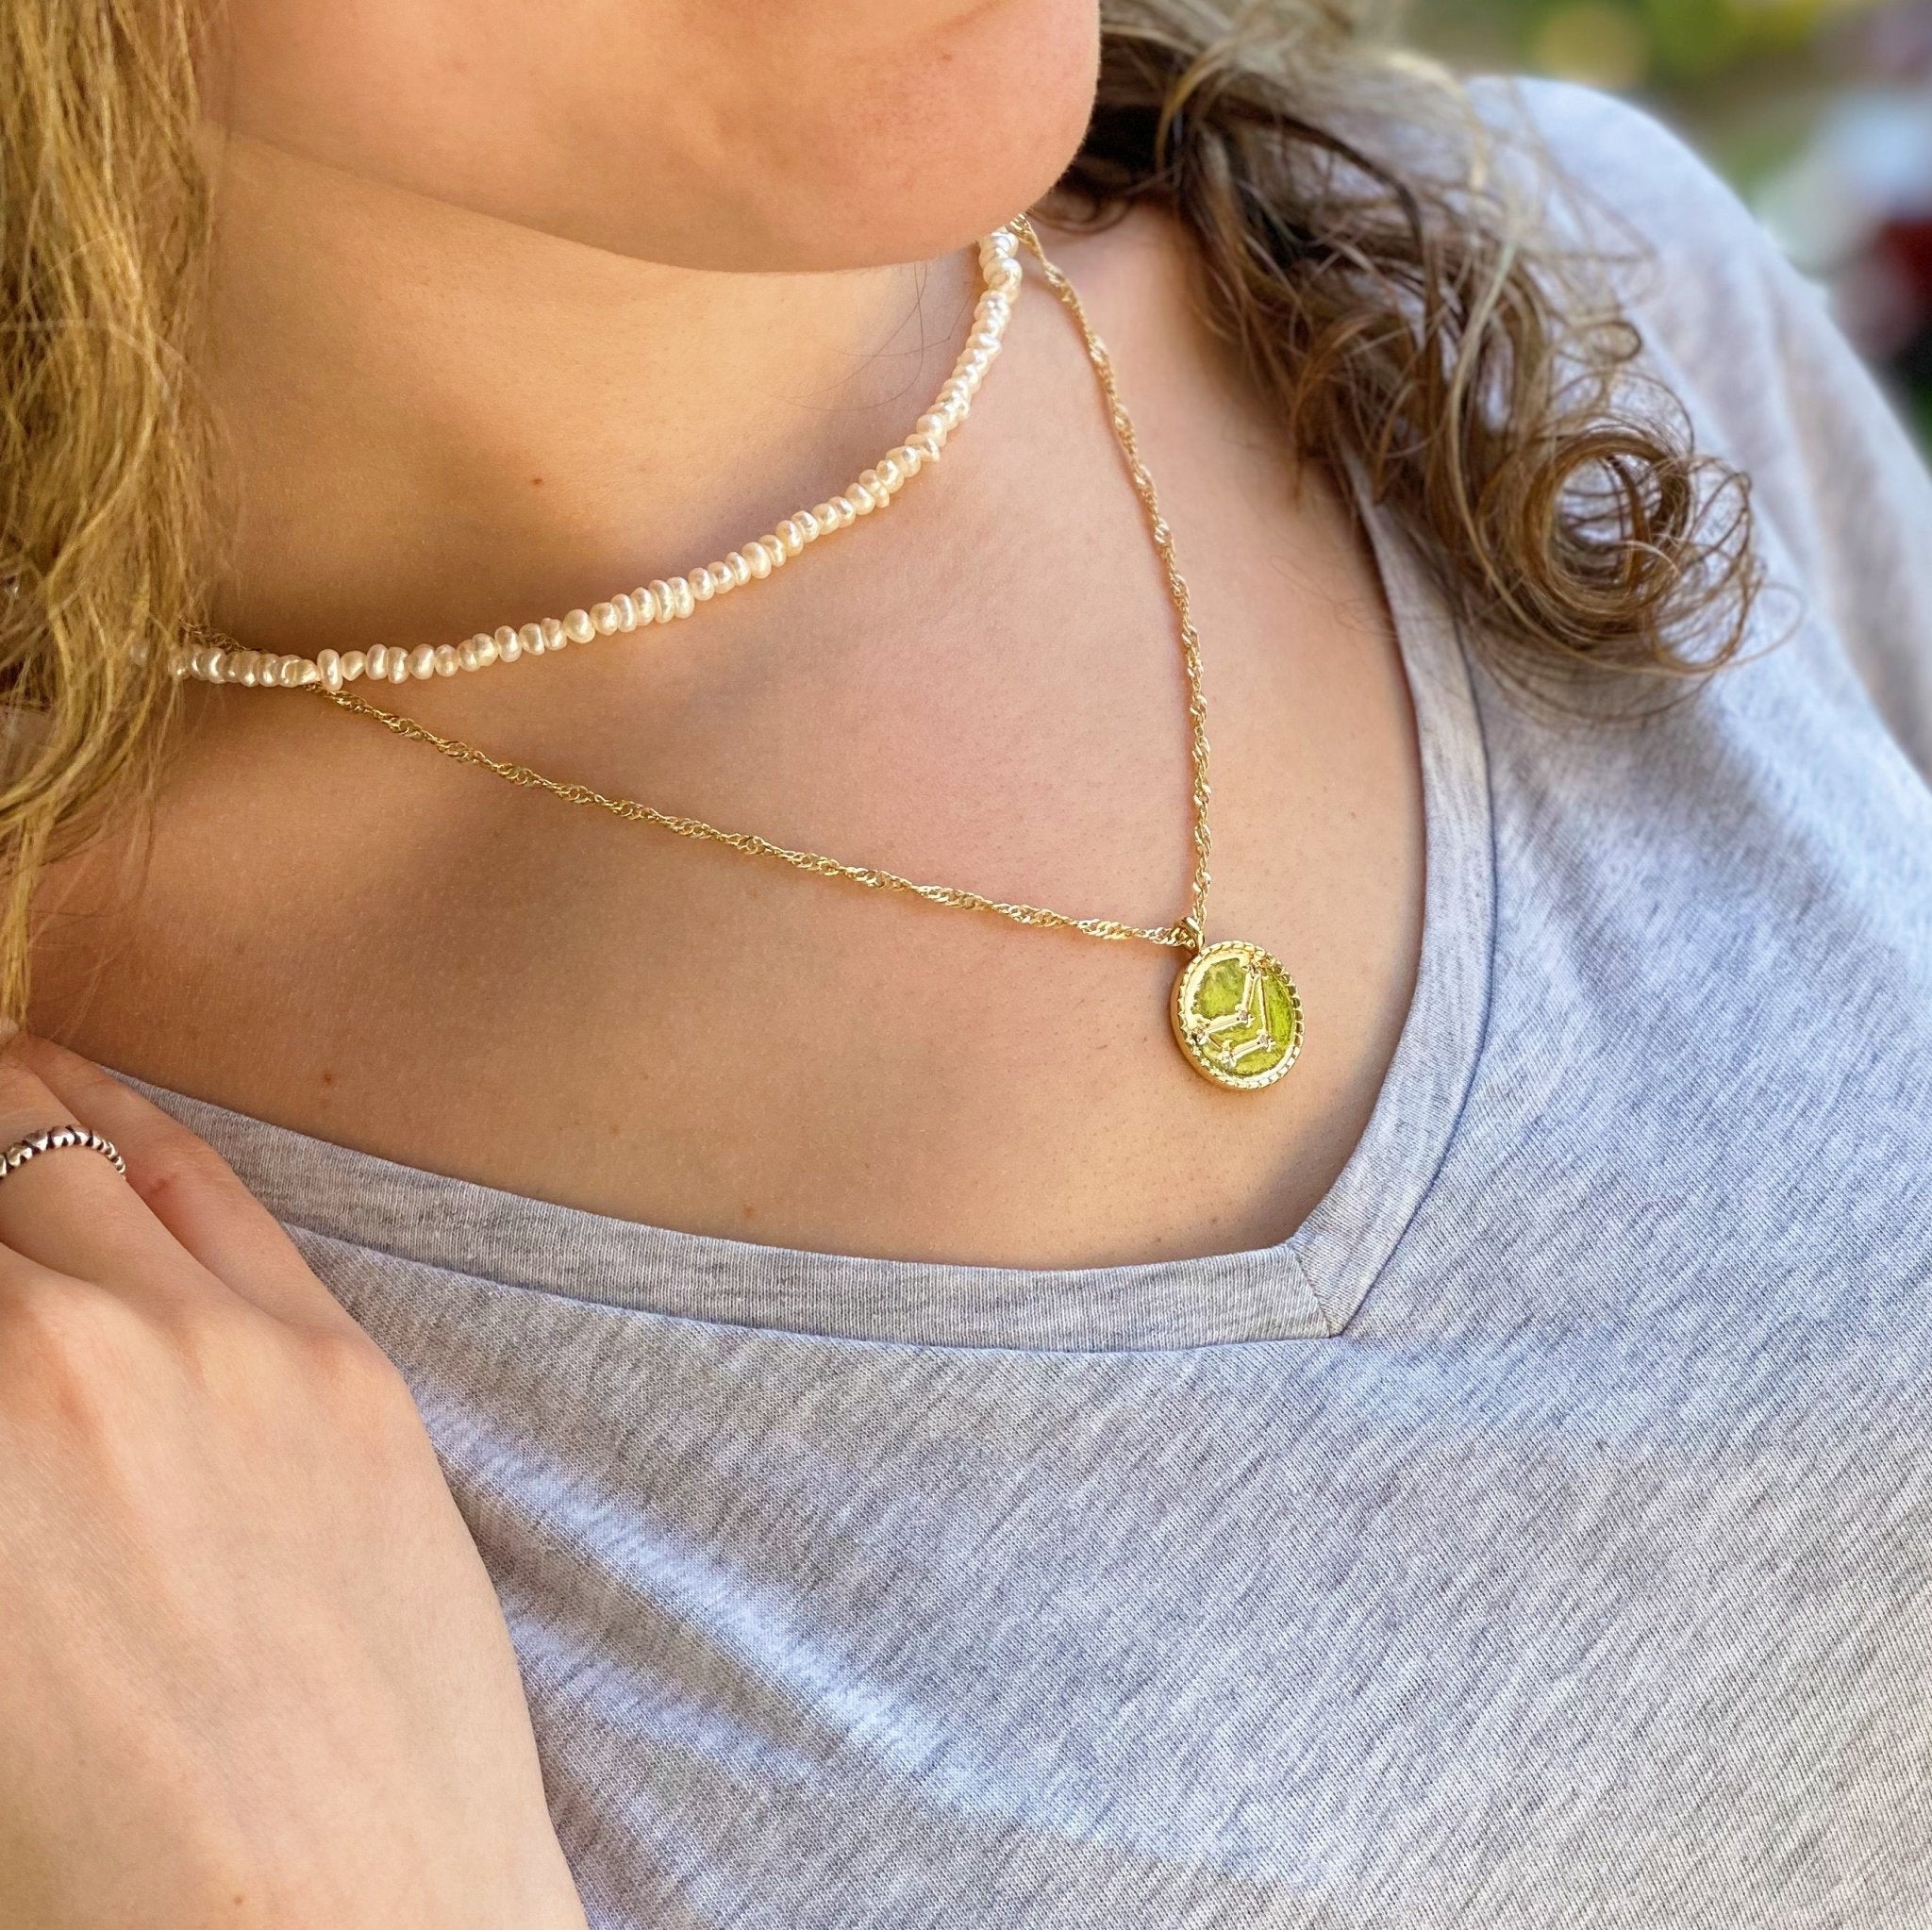 Astrological Glam Necklace - The Kindness Cause Cool Necklaces